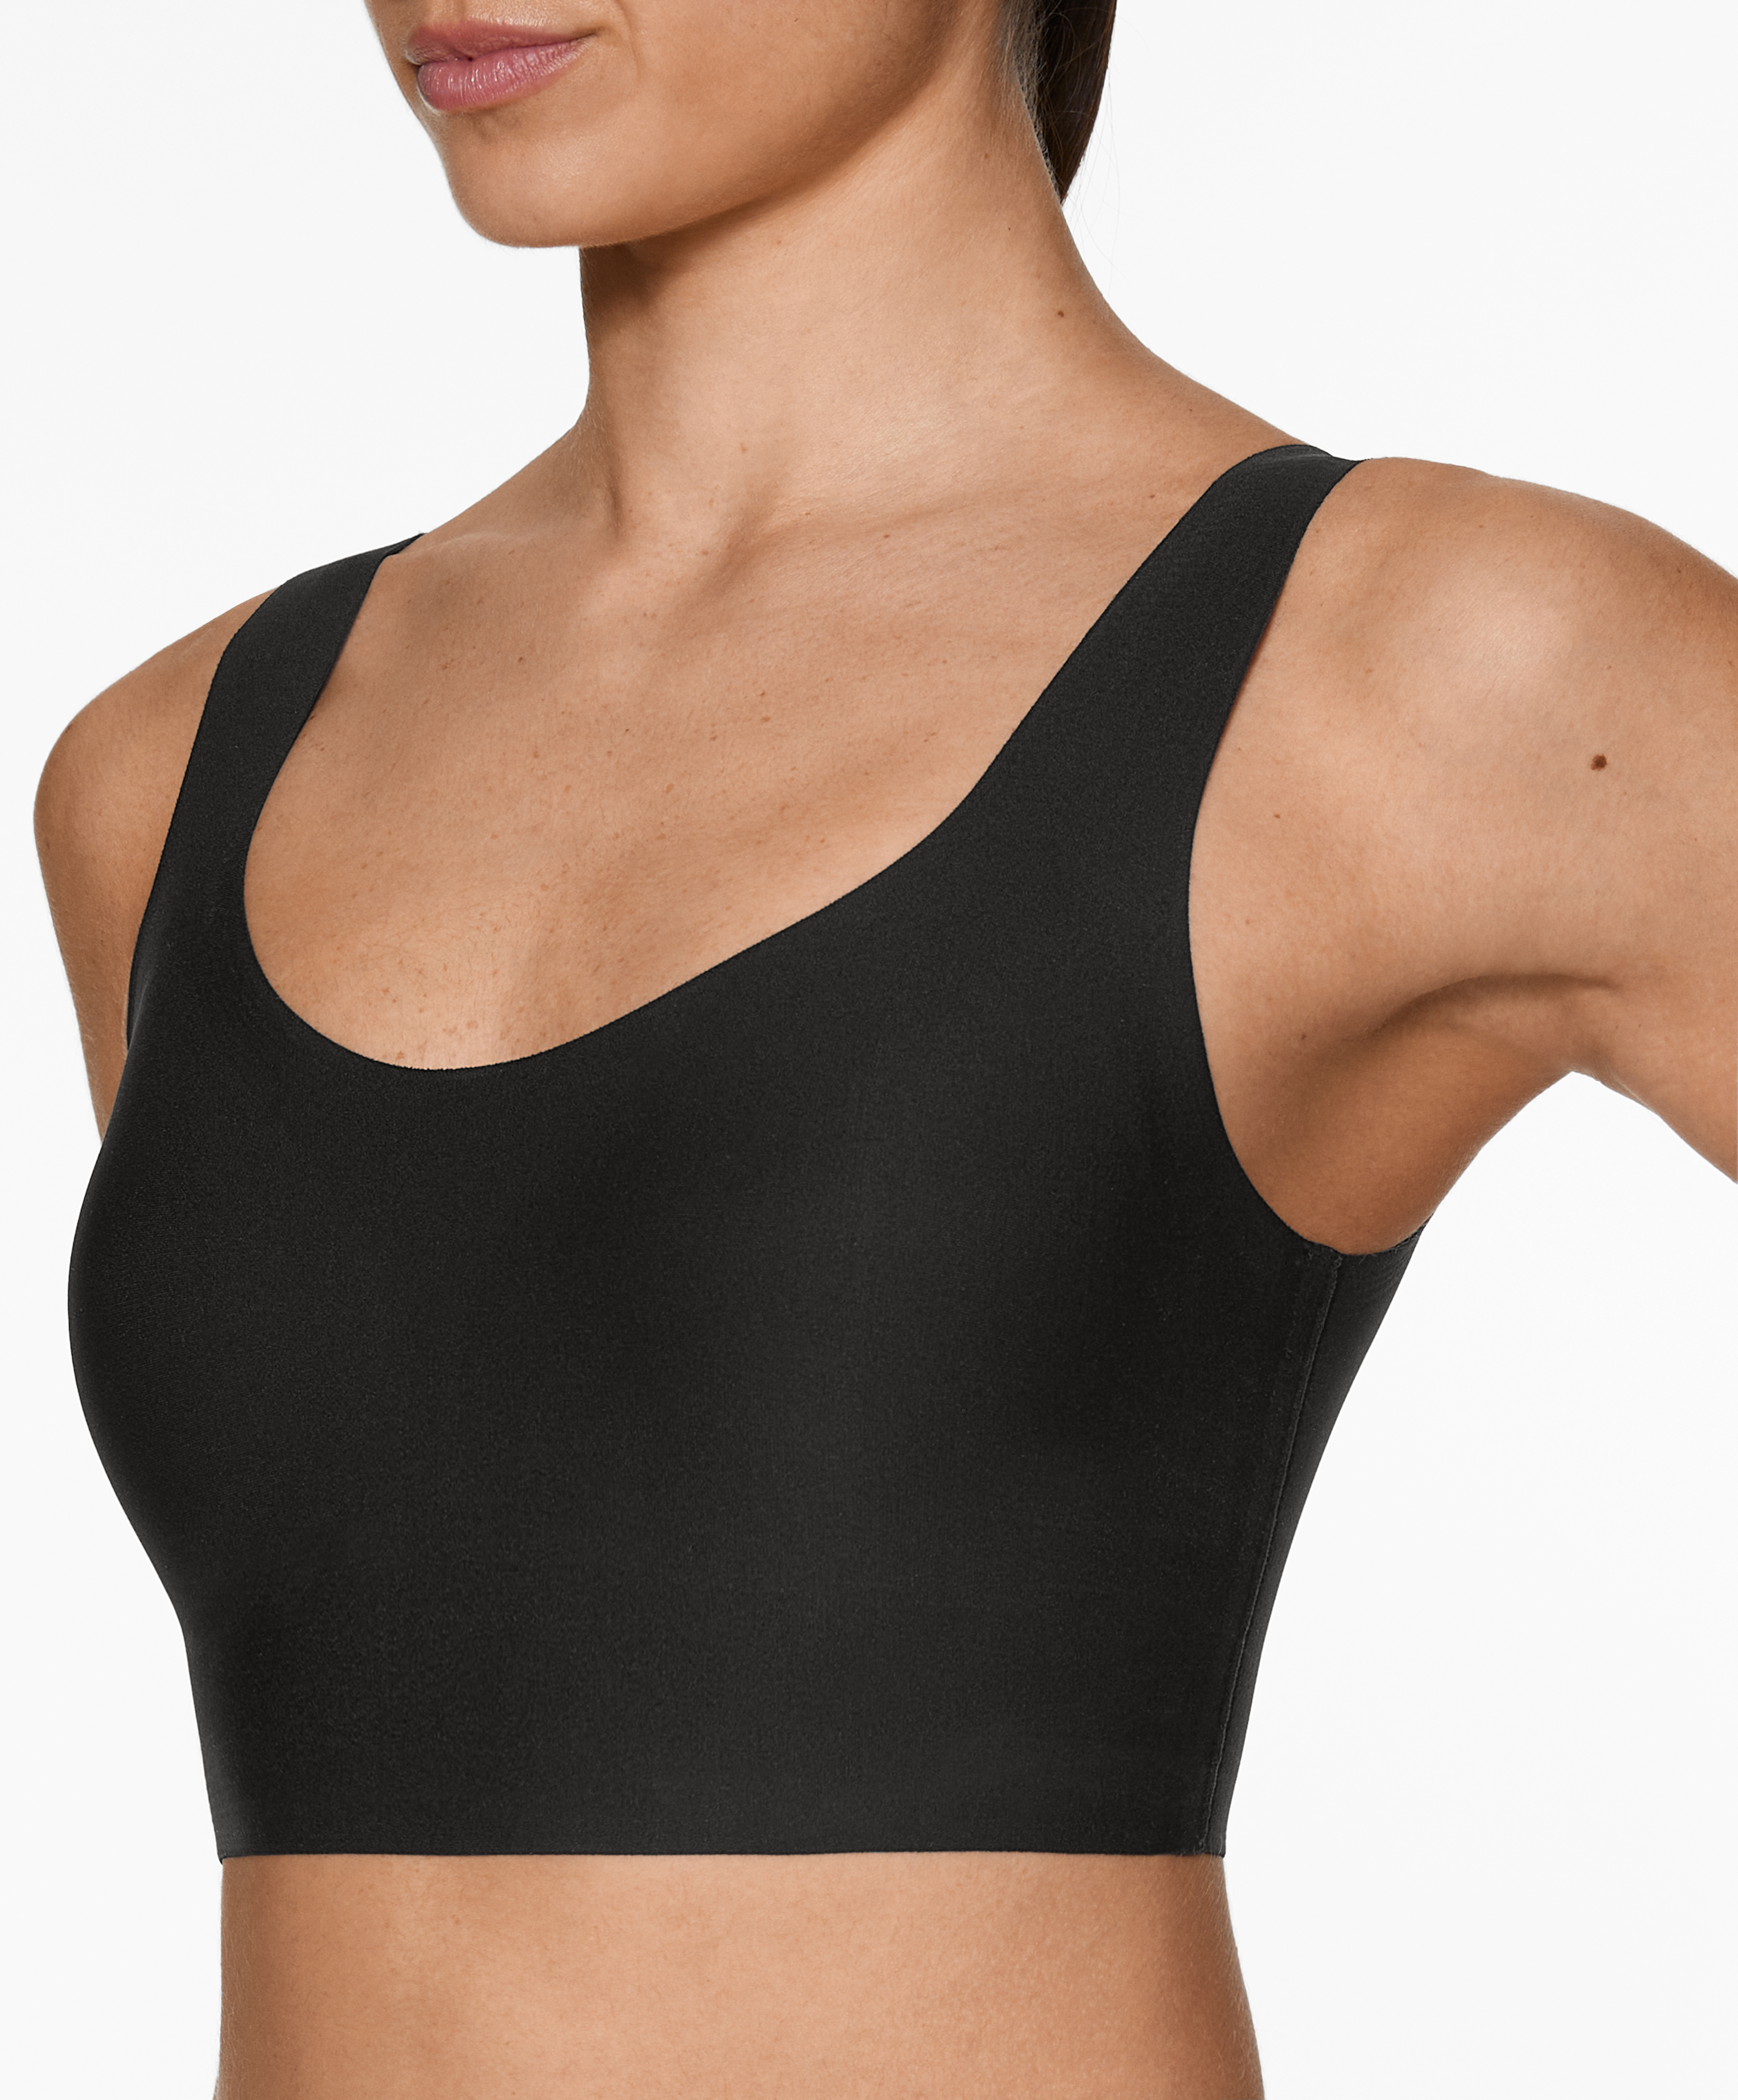 Perfect-adapt medium-support sports bra with cups